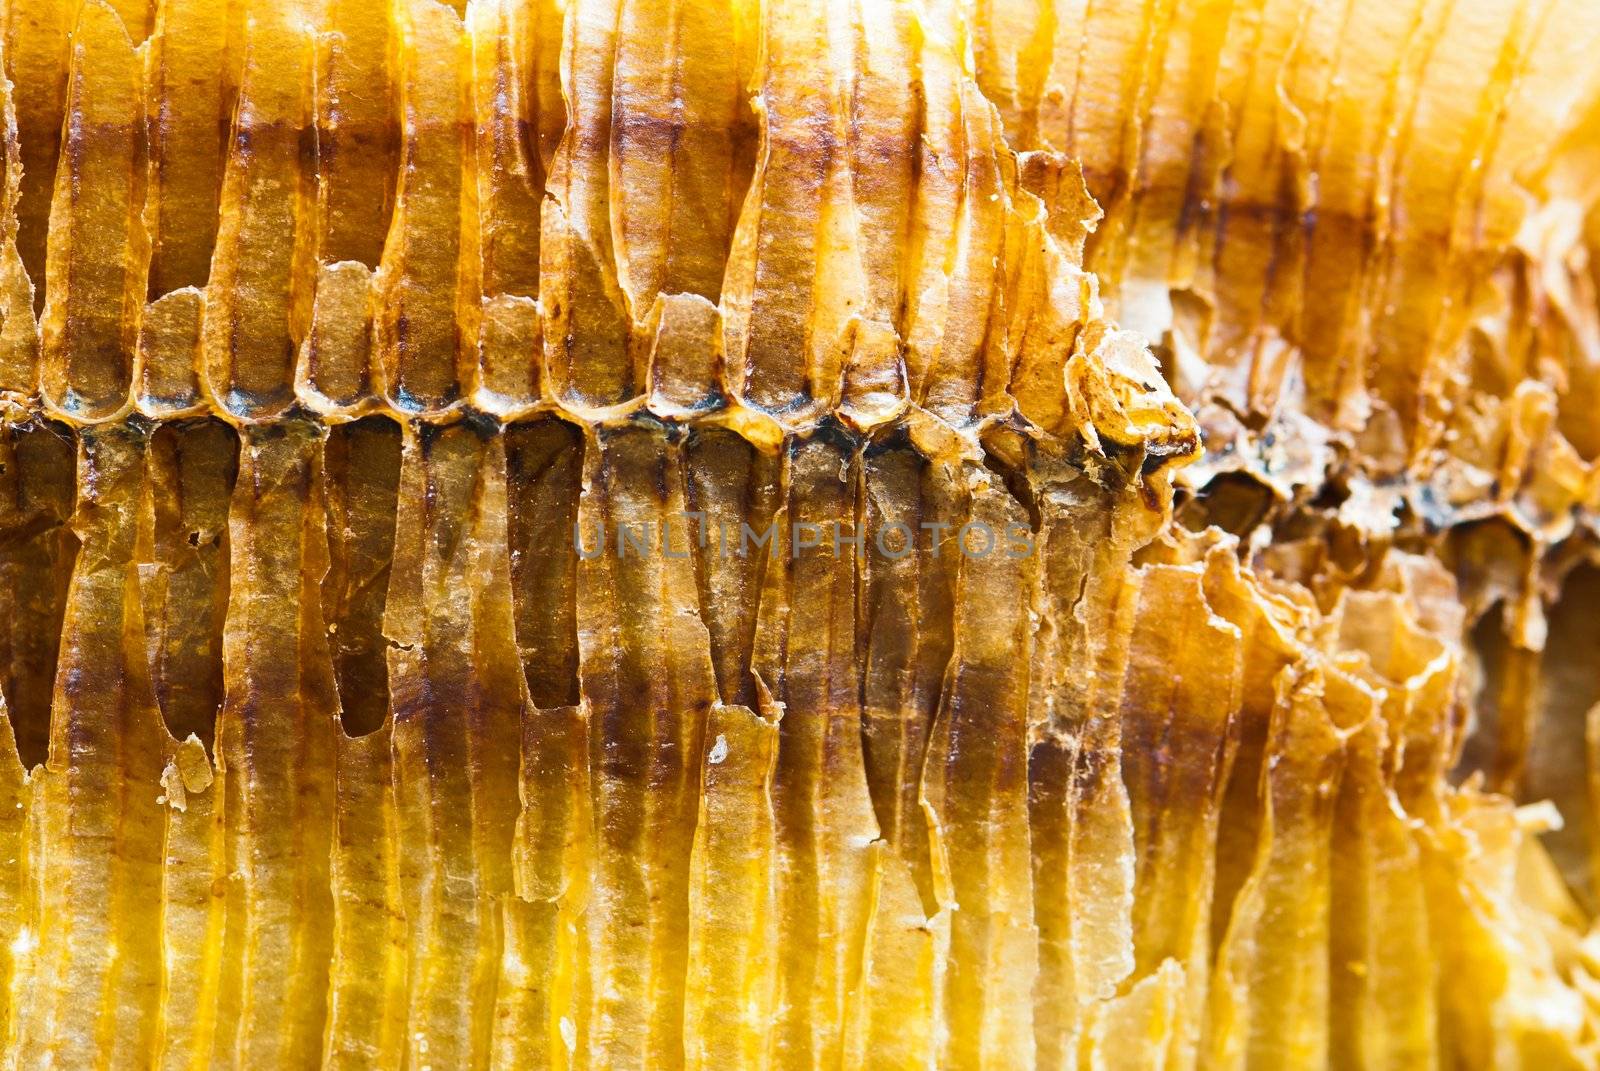 Closeup of the side of honey comb on a sunny day showing detail patterns and gradual lights
